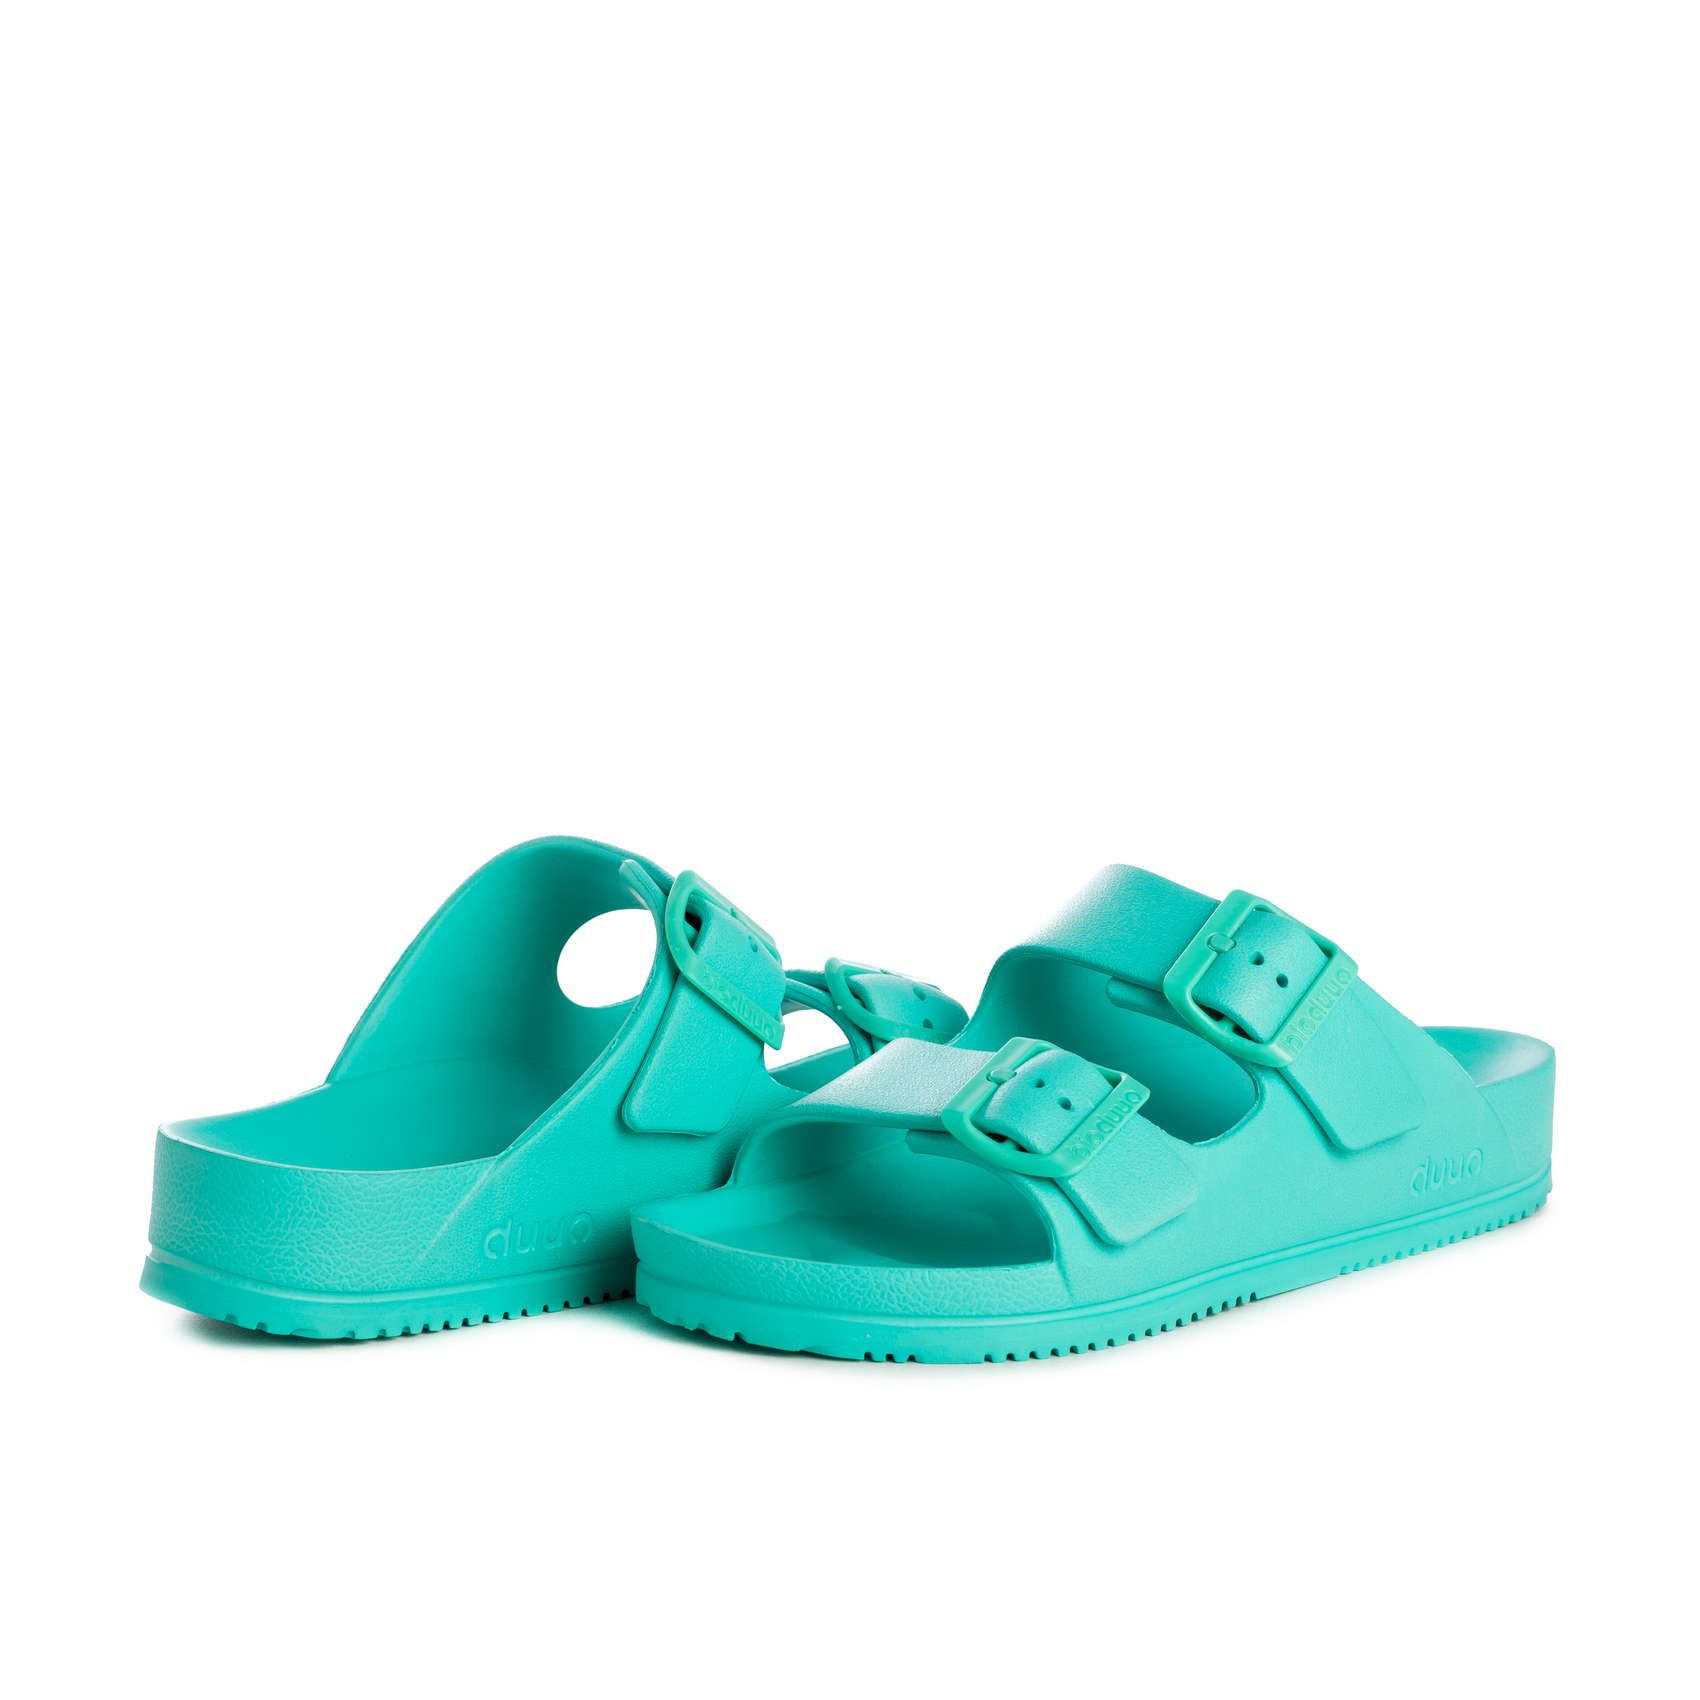 Flat sandal block color in turquoise